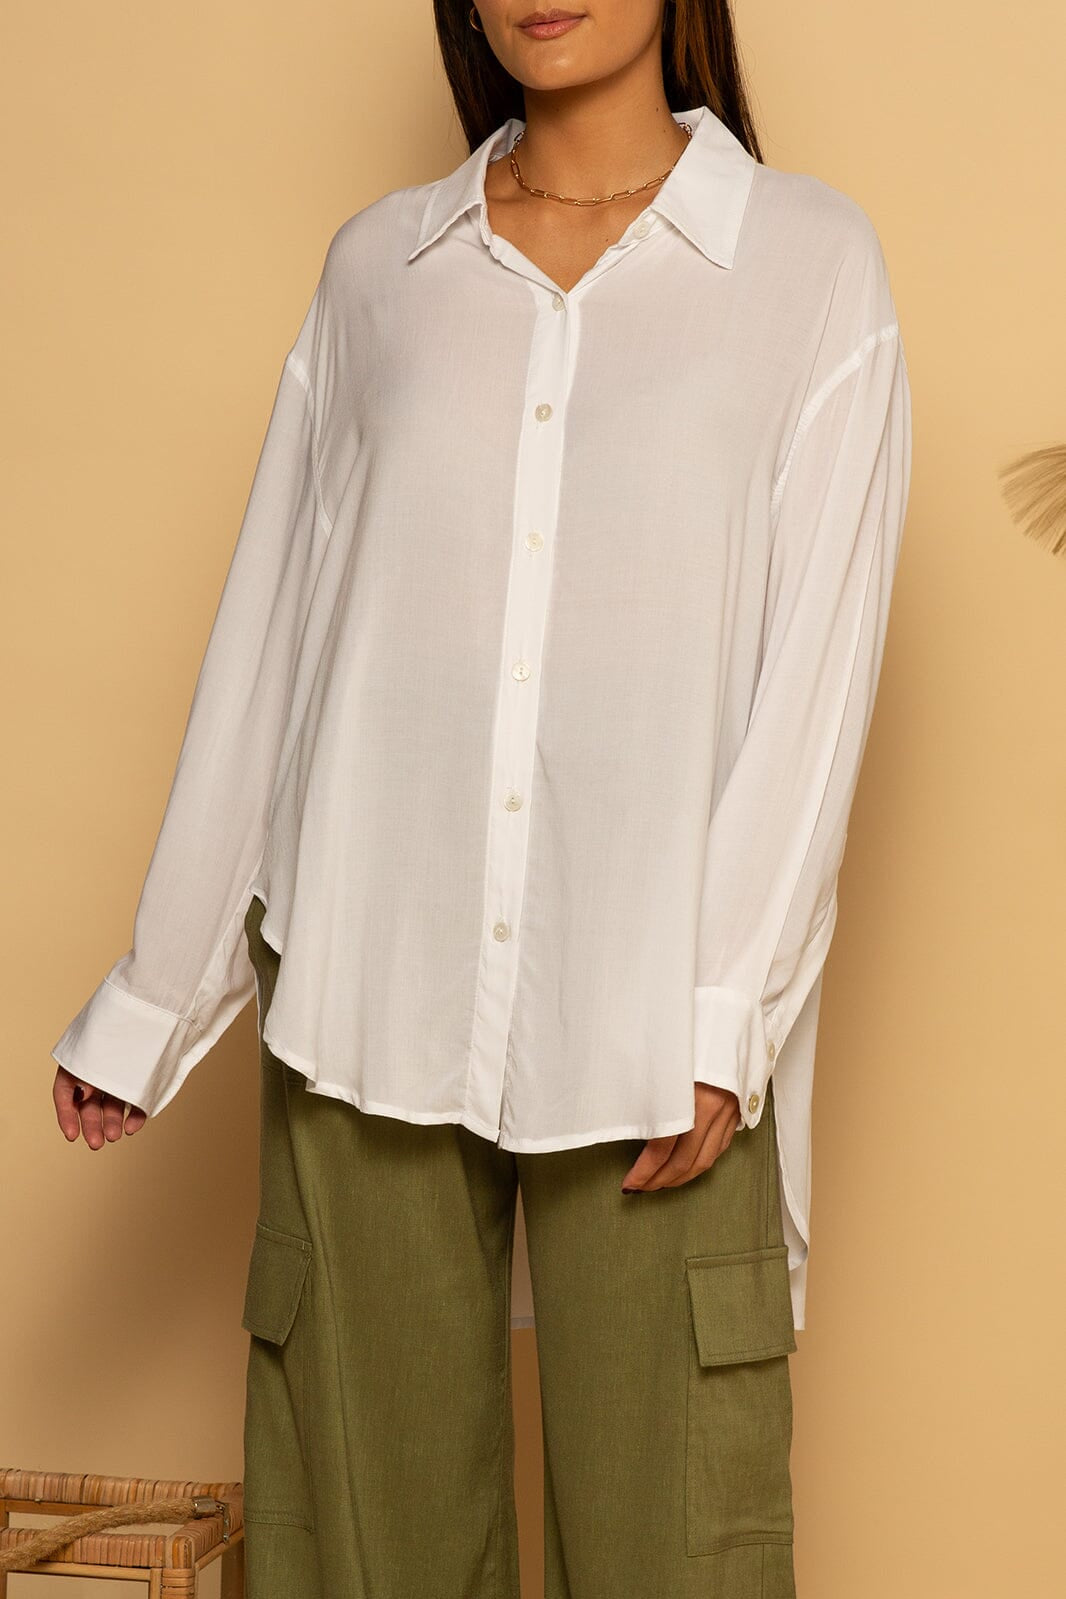 LONG SLEEVE BUTTON UP BLOUSE - WHITE - XS